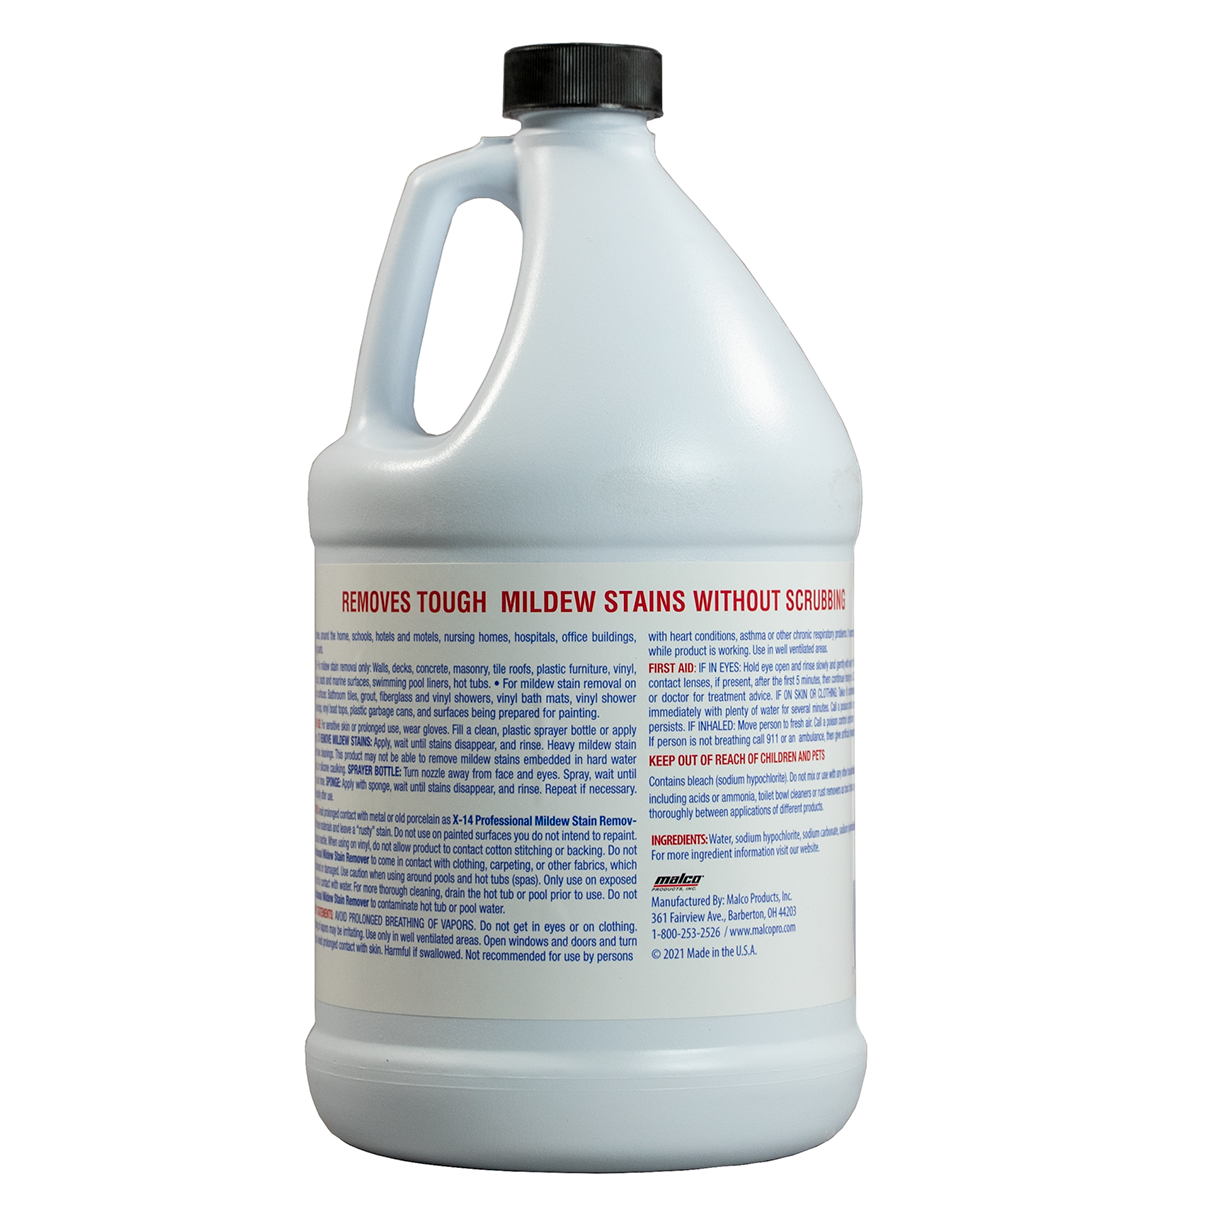 X-14® Professional Mildew Stain Remover